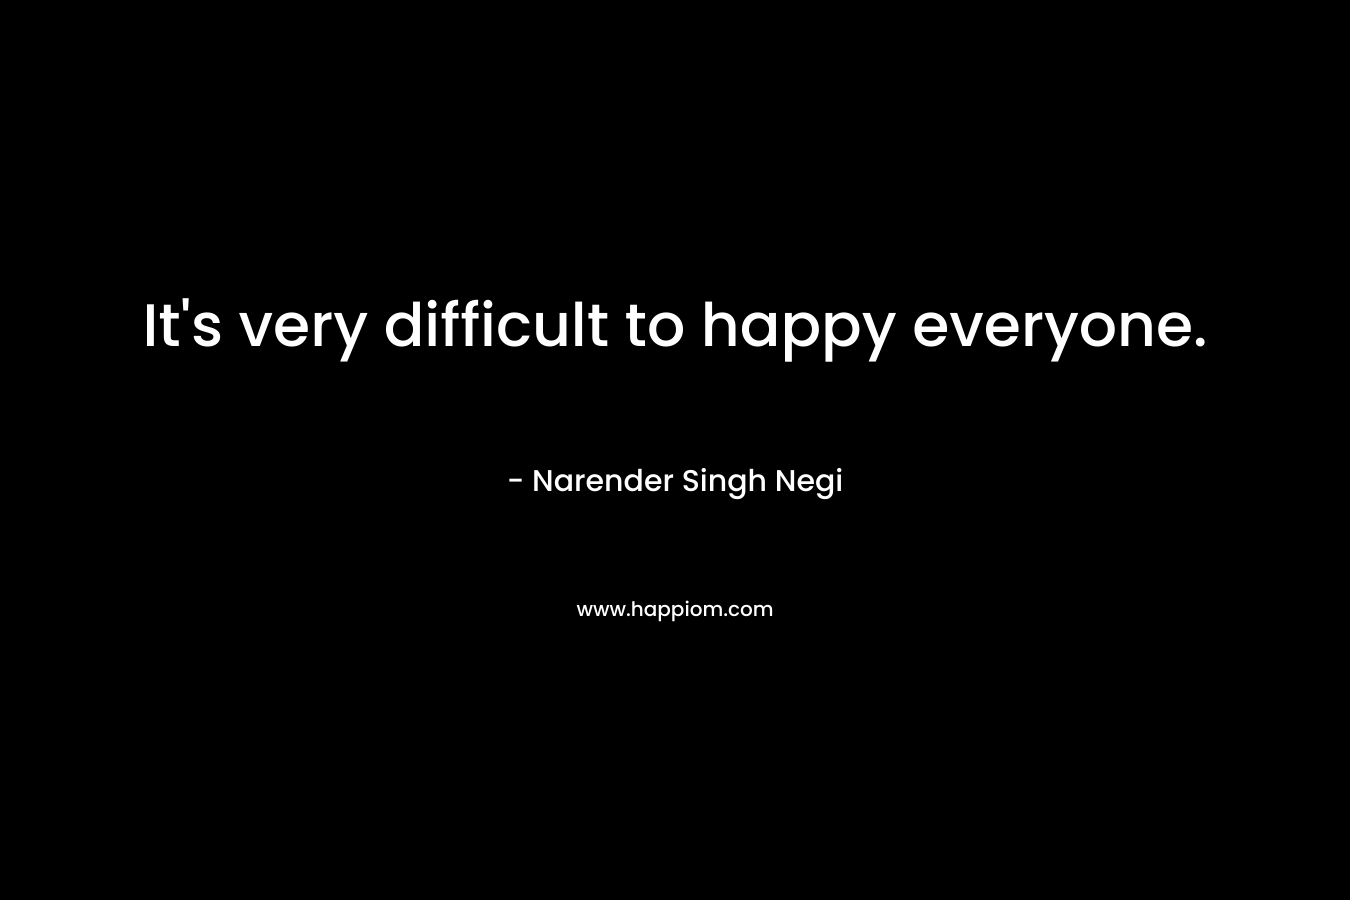 It's very difficult to happy everyone.